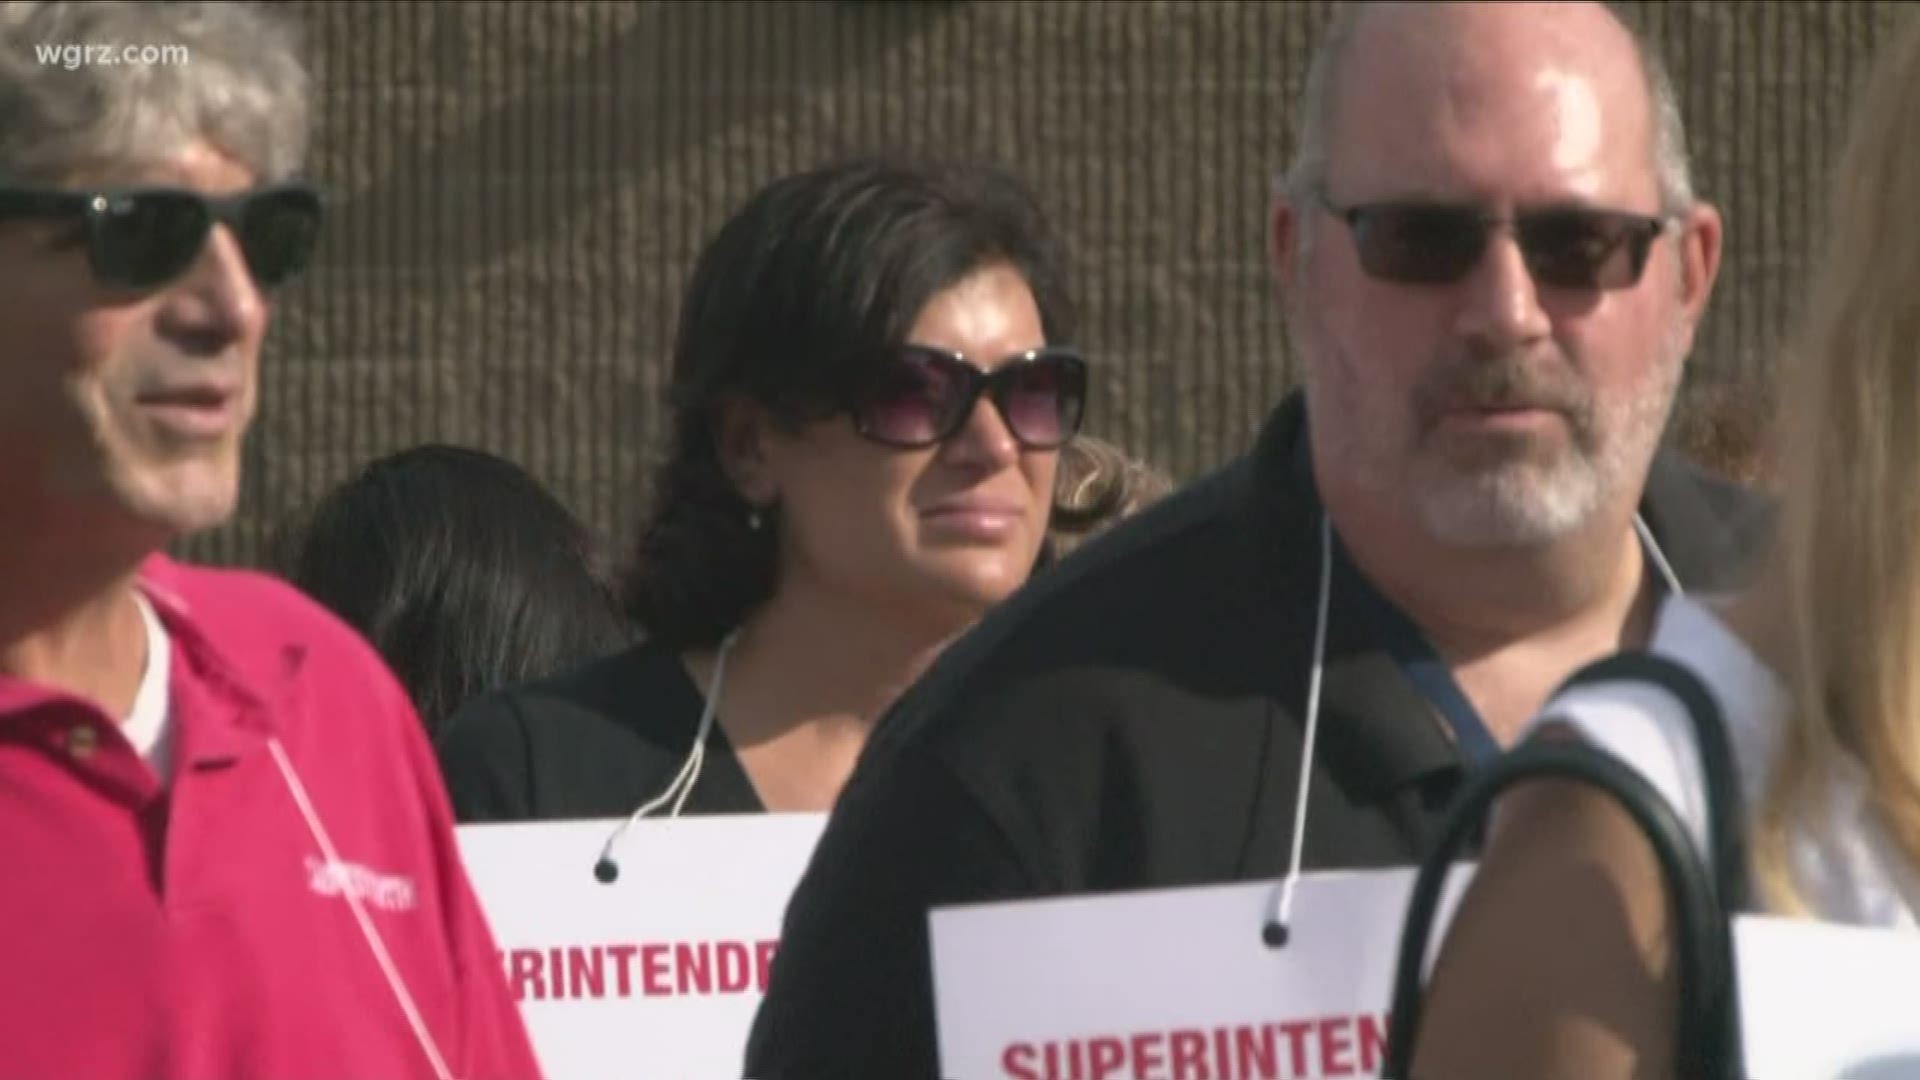 The Buffalo Teachers Federation held a protest Wednesday afternoon at the Waterfront School.